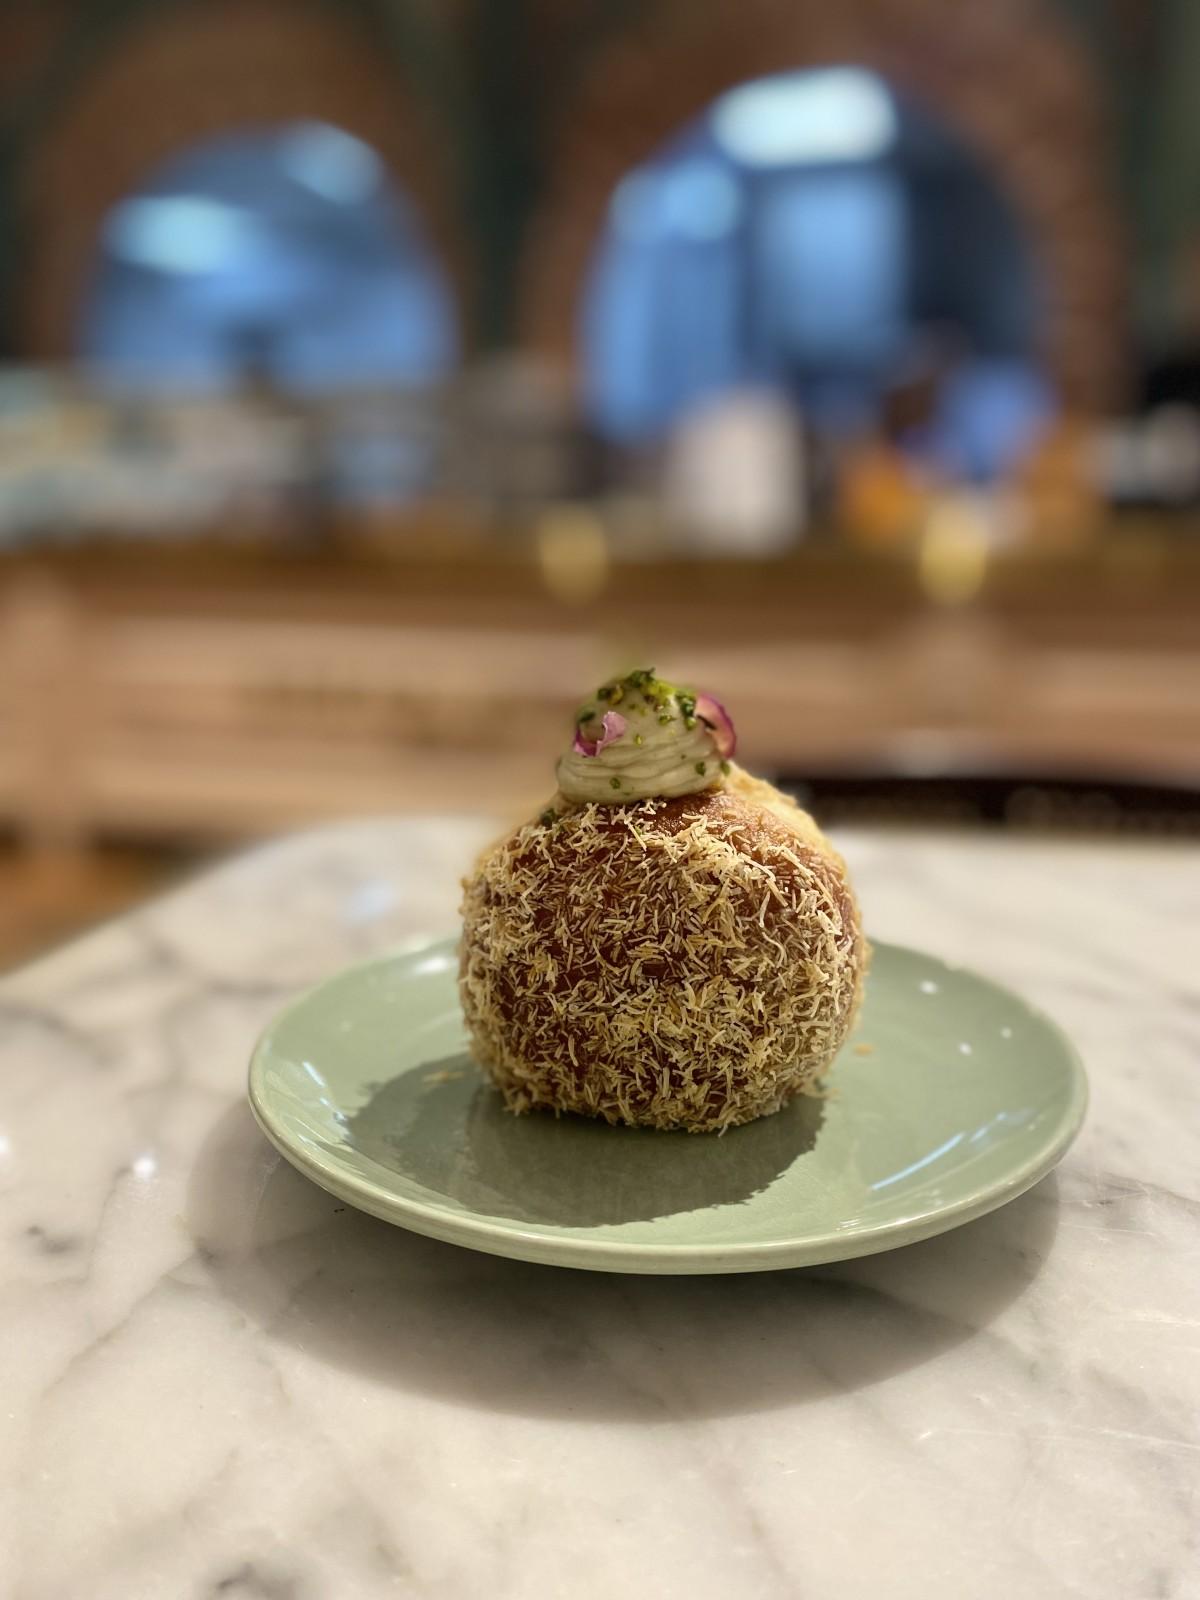 Indulge in the Best of Both Worlds: Kunafa Meets Donut